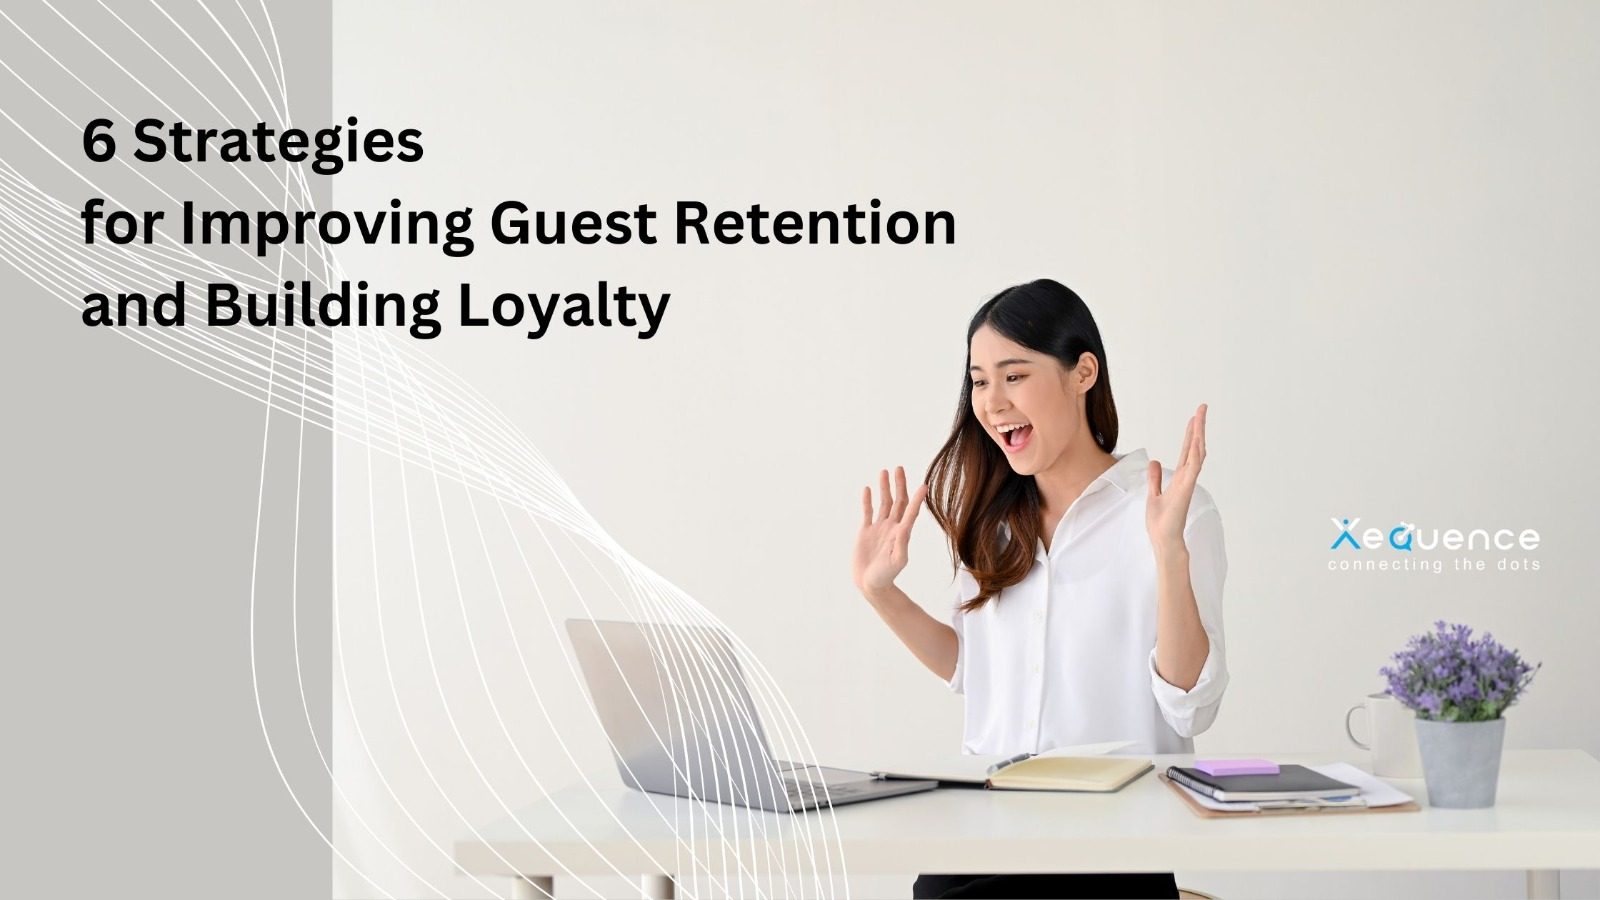 6 Strategies for Improving Guest Retention and Building Loyalty